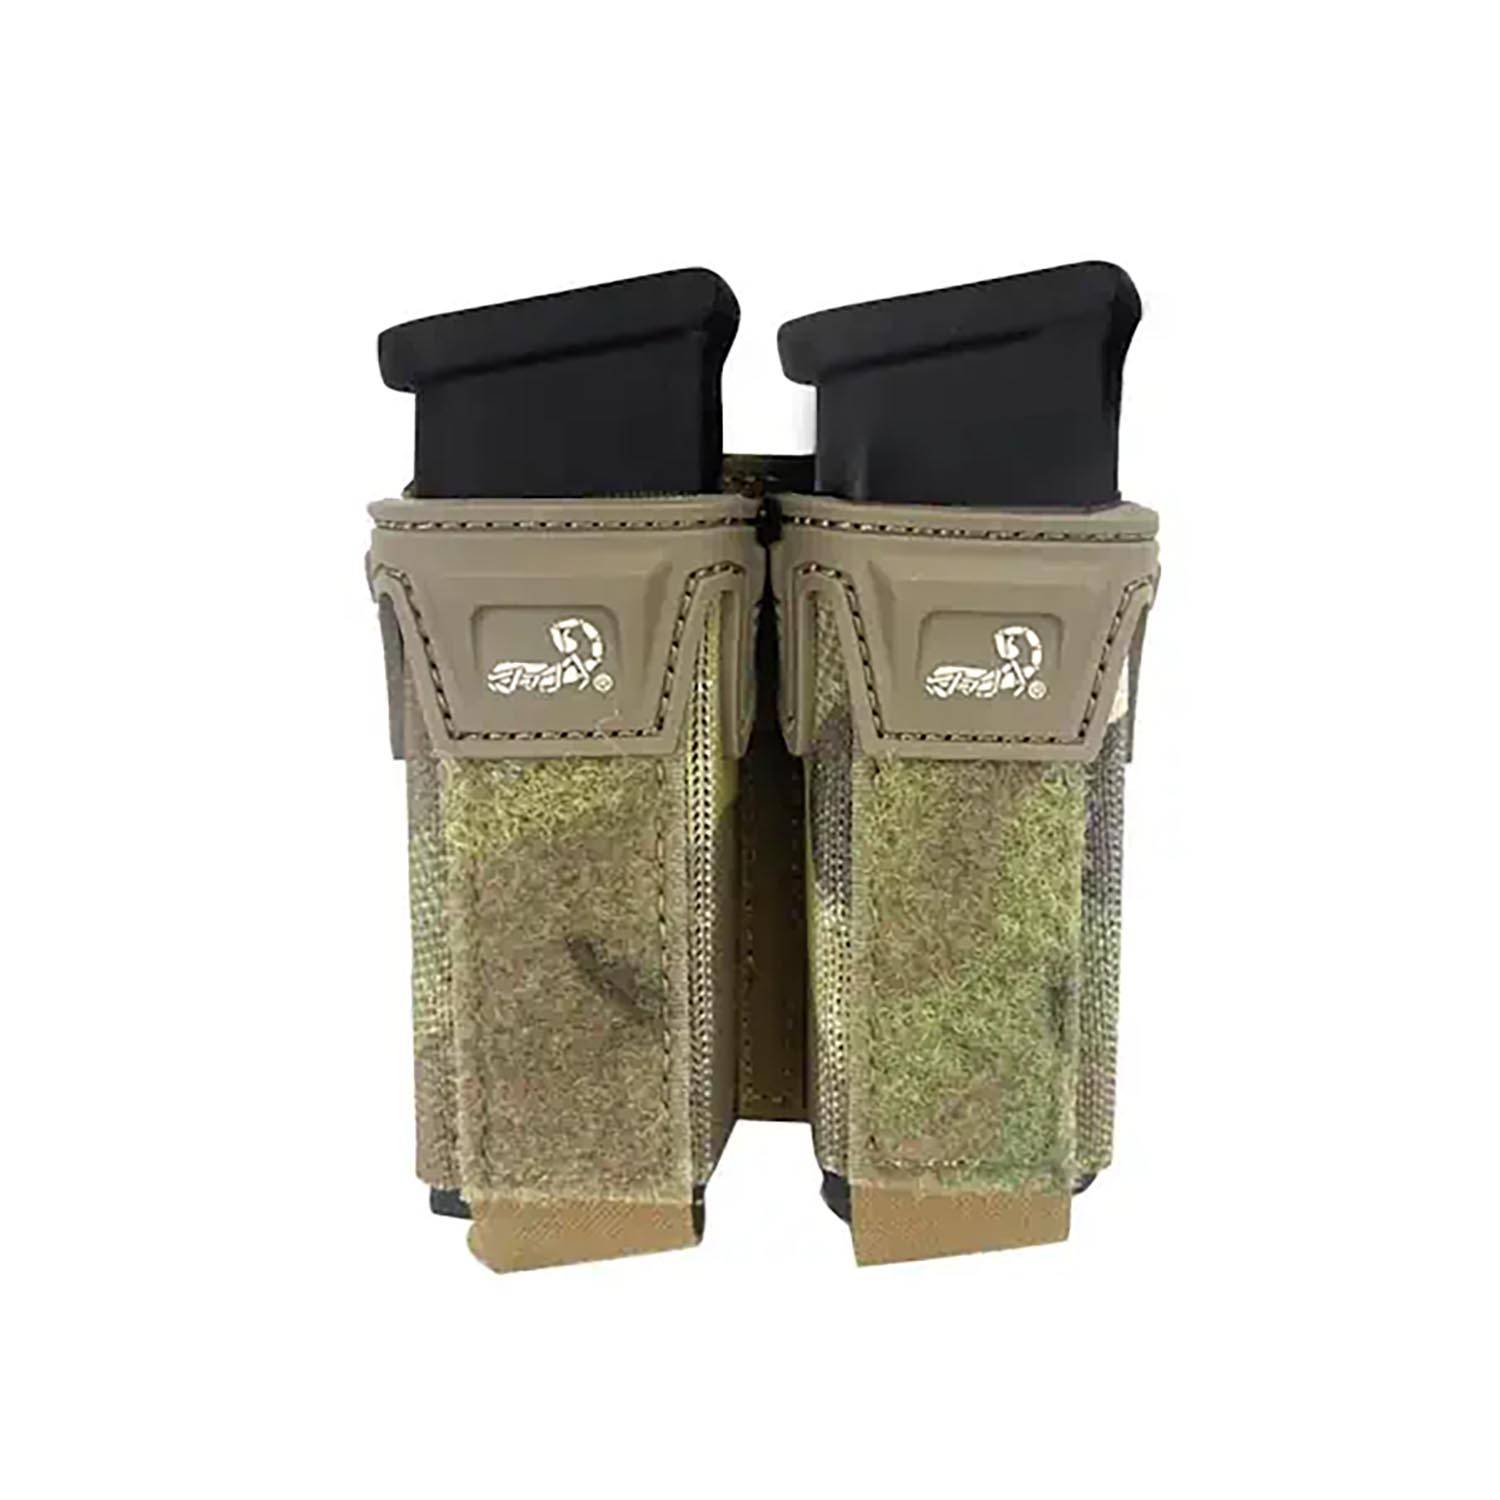 AGILITE PINCER DOUBLE MAG POUCH